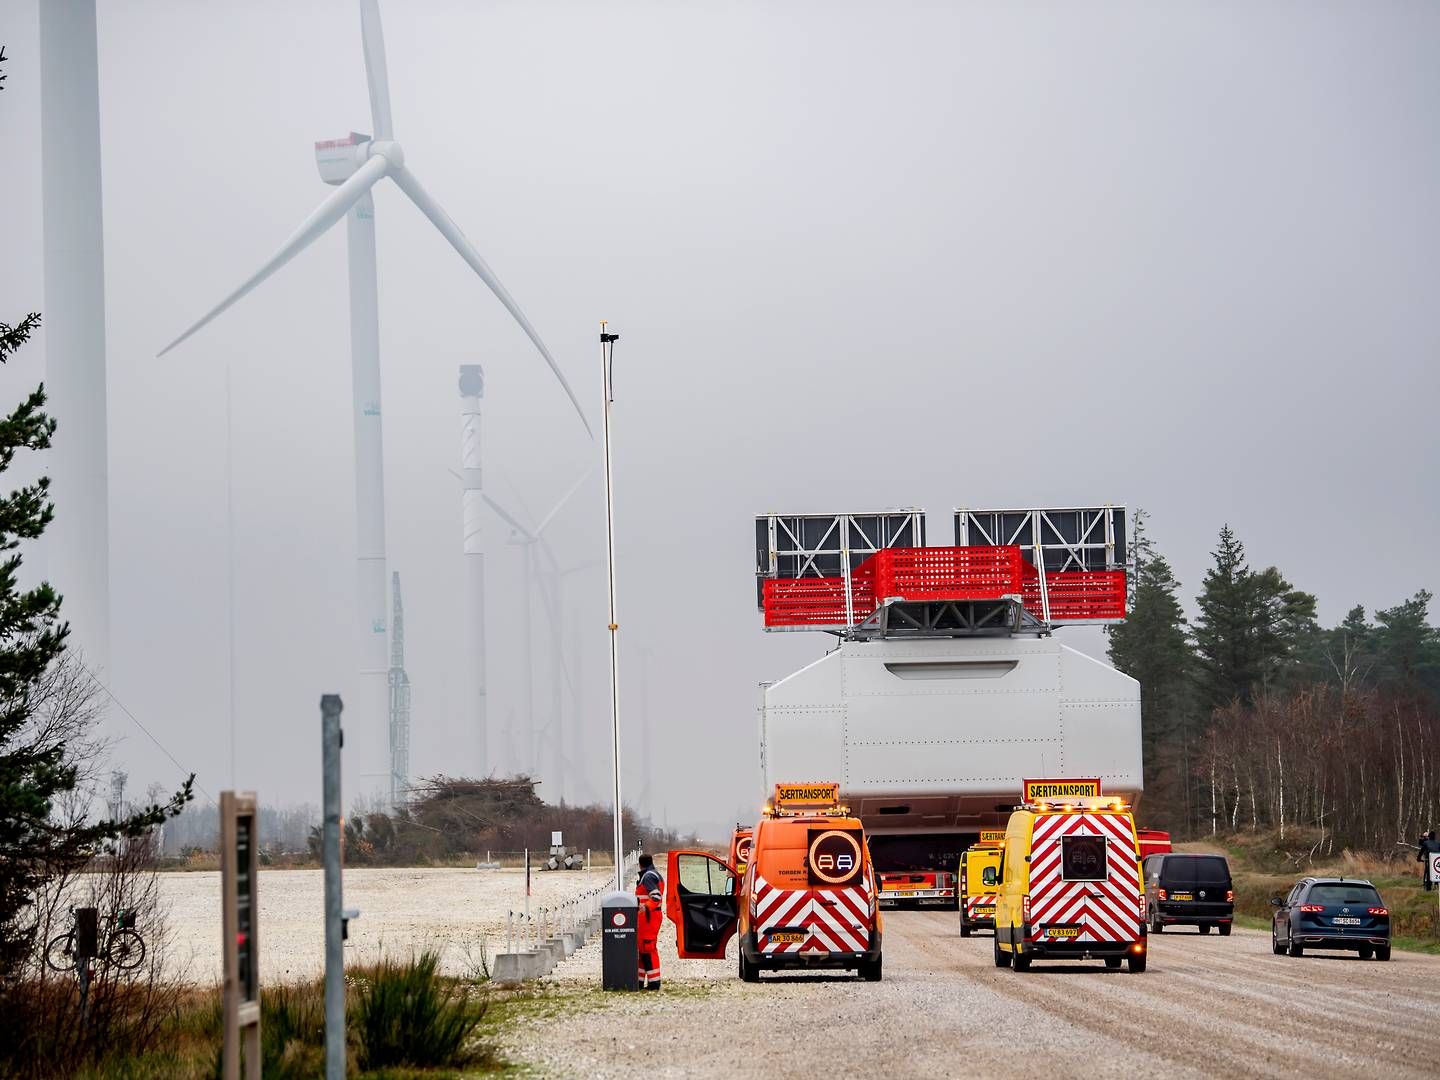 Here's a picture of what was, at the end of 2022, the world's largest wind turbine transportation. It looks a little more exciting than an image of the ISO/IEC 81346-10 standard. | Foto: René Schütze